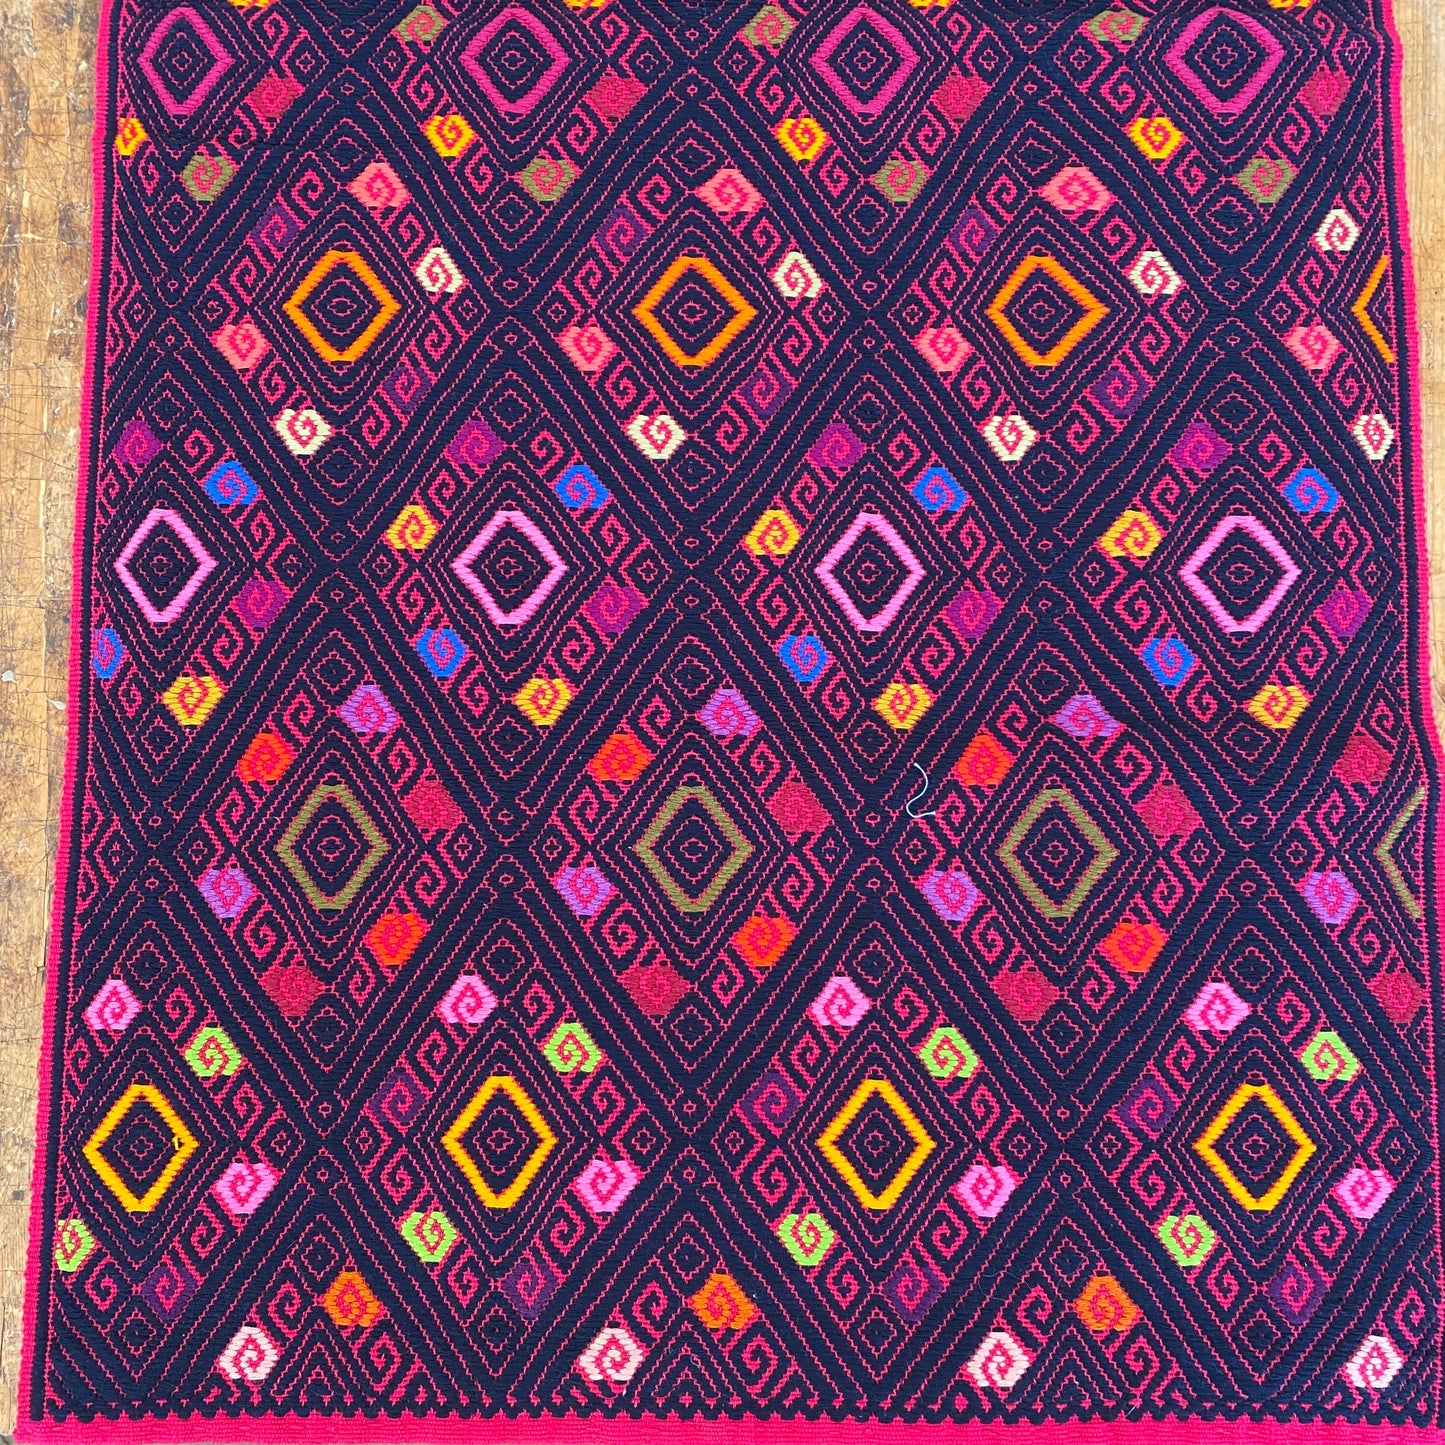 Woven Diamond Table Runners from Mexico - Black and Magenta